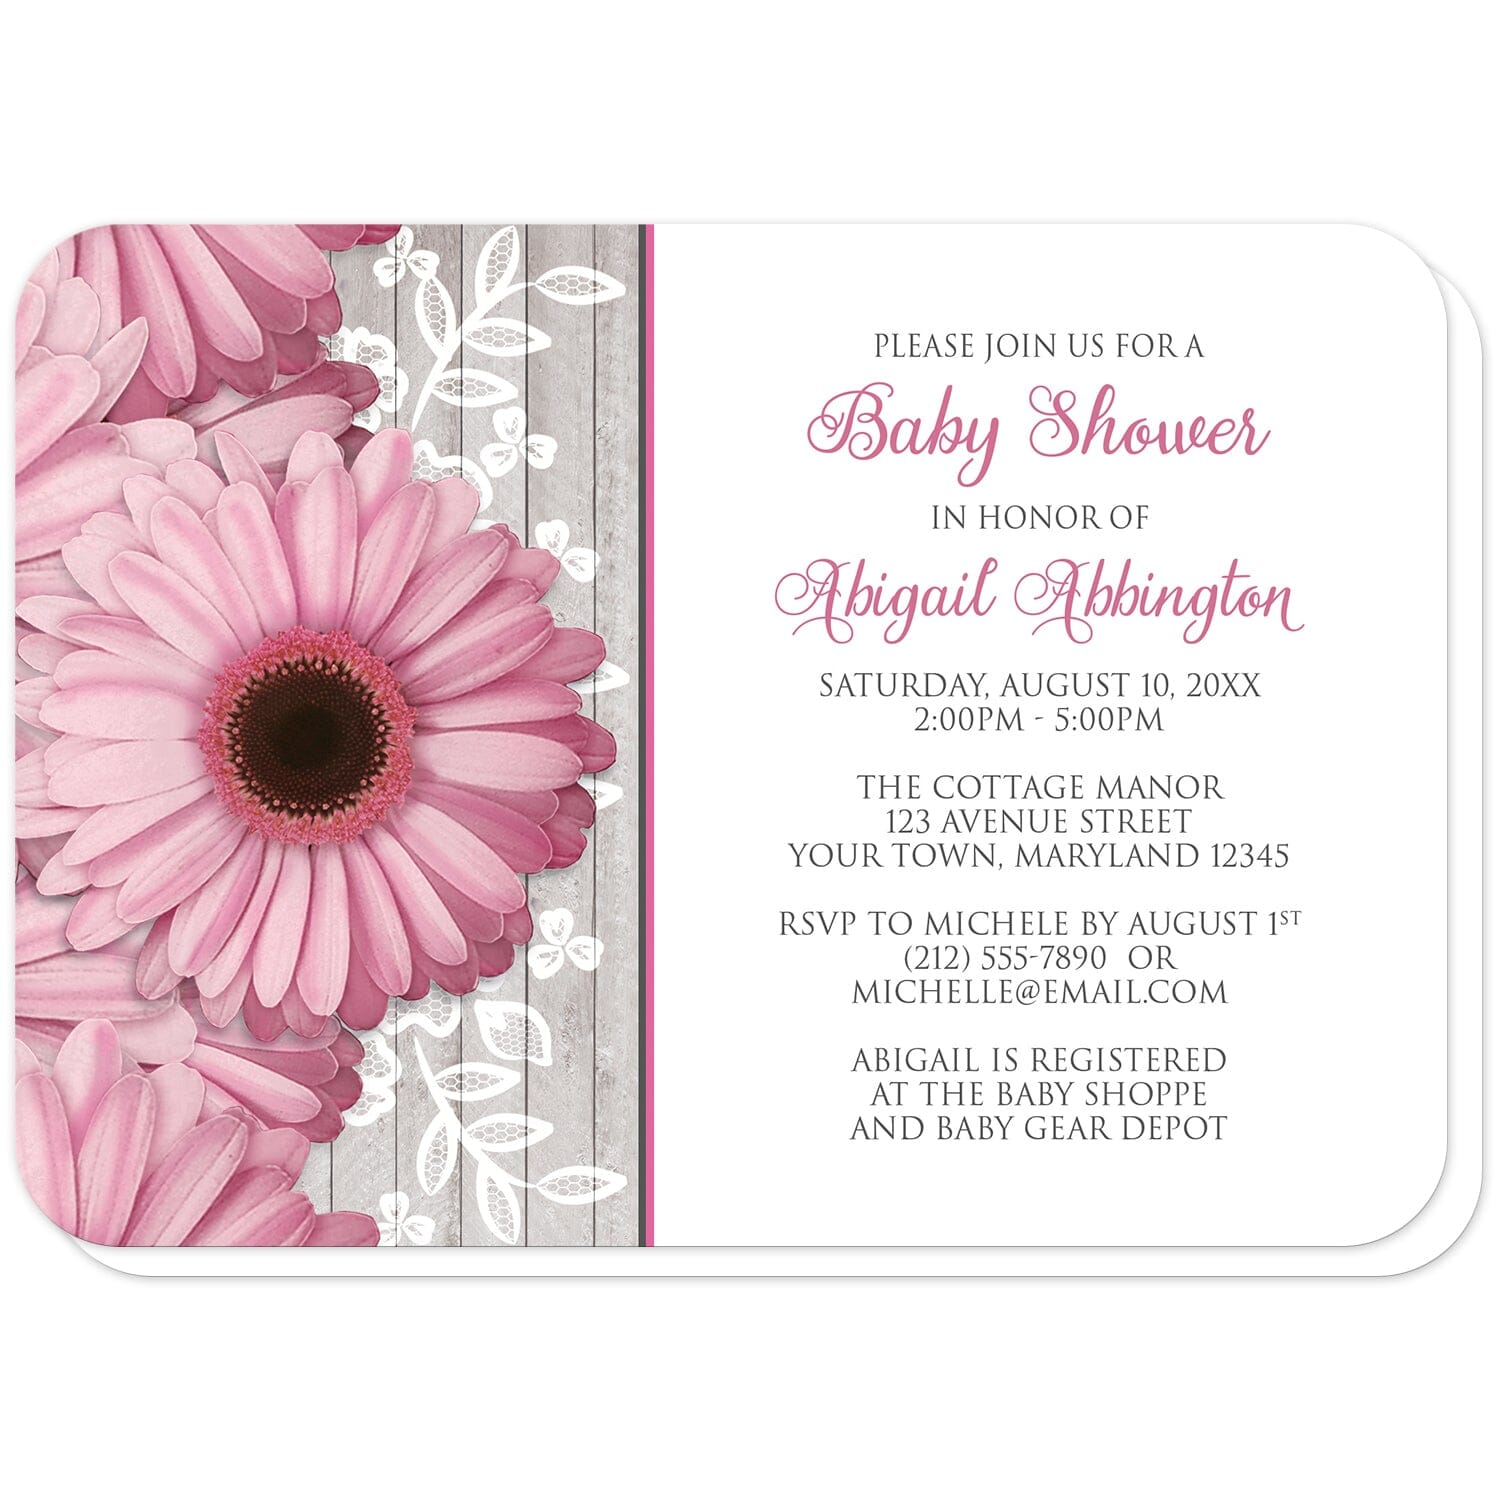 Rustic Pink Daisy Wood White Baby Shower Invitations (with rounded corners) at Artistically Invited. Rustic pink daisy wood white baby shower invitations designed with large and lovely pink daisy flowers with a white lace overlay over a light gray wood illustration along the left side. Your personalized baby shower celebration details are custom printed in pink and gray over a white background to the right of the pretty pink daisies.